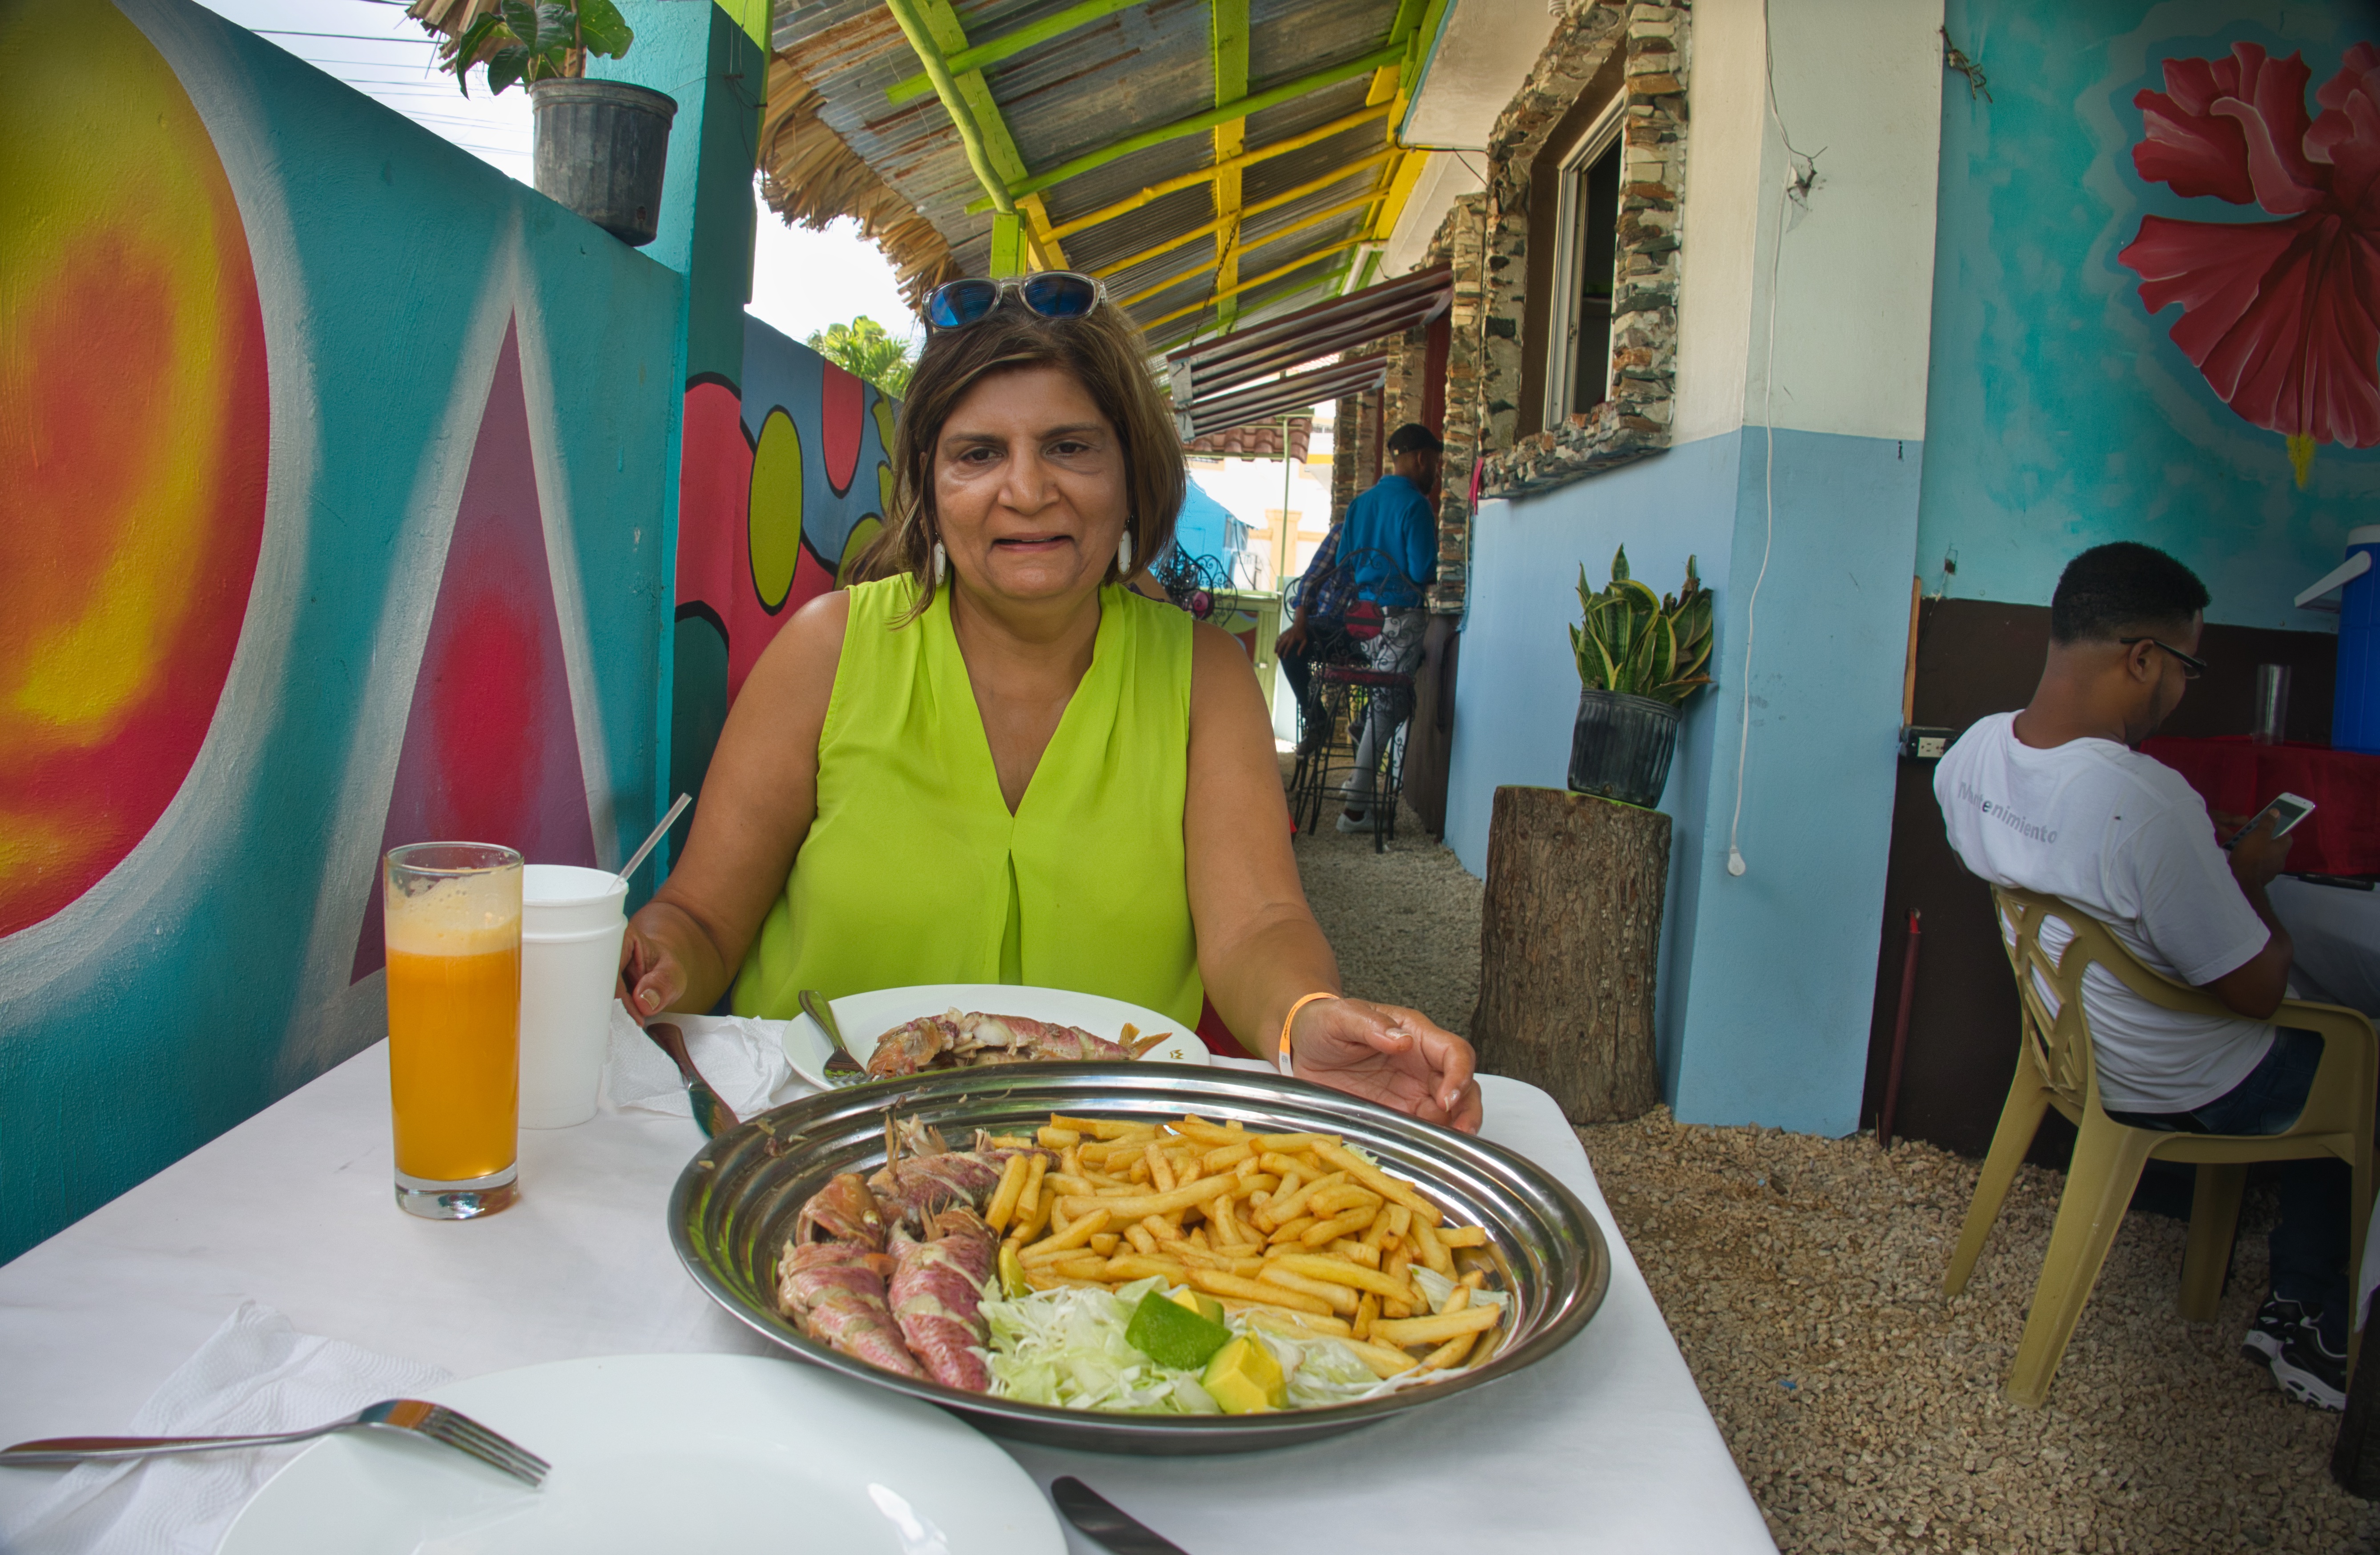 La Mama platter of Red Snapper, fries, and salad, with fresh squeezed passion fruit and mango juice